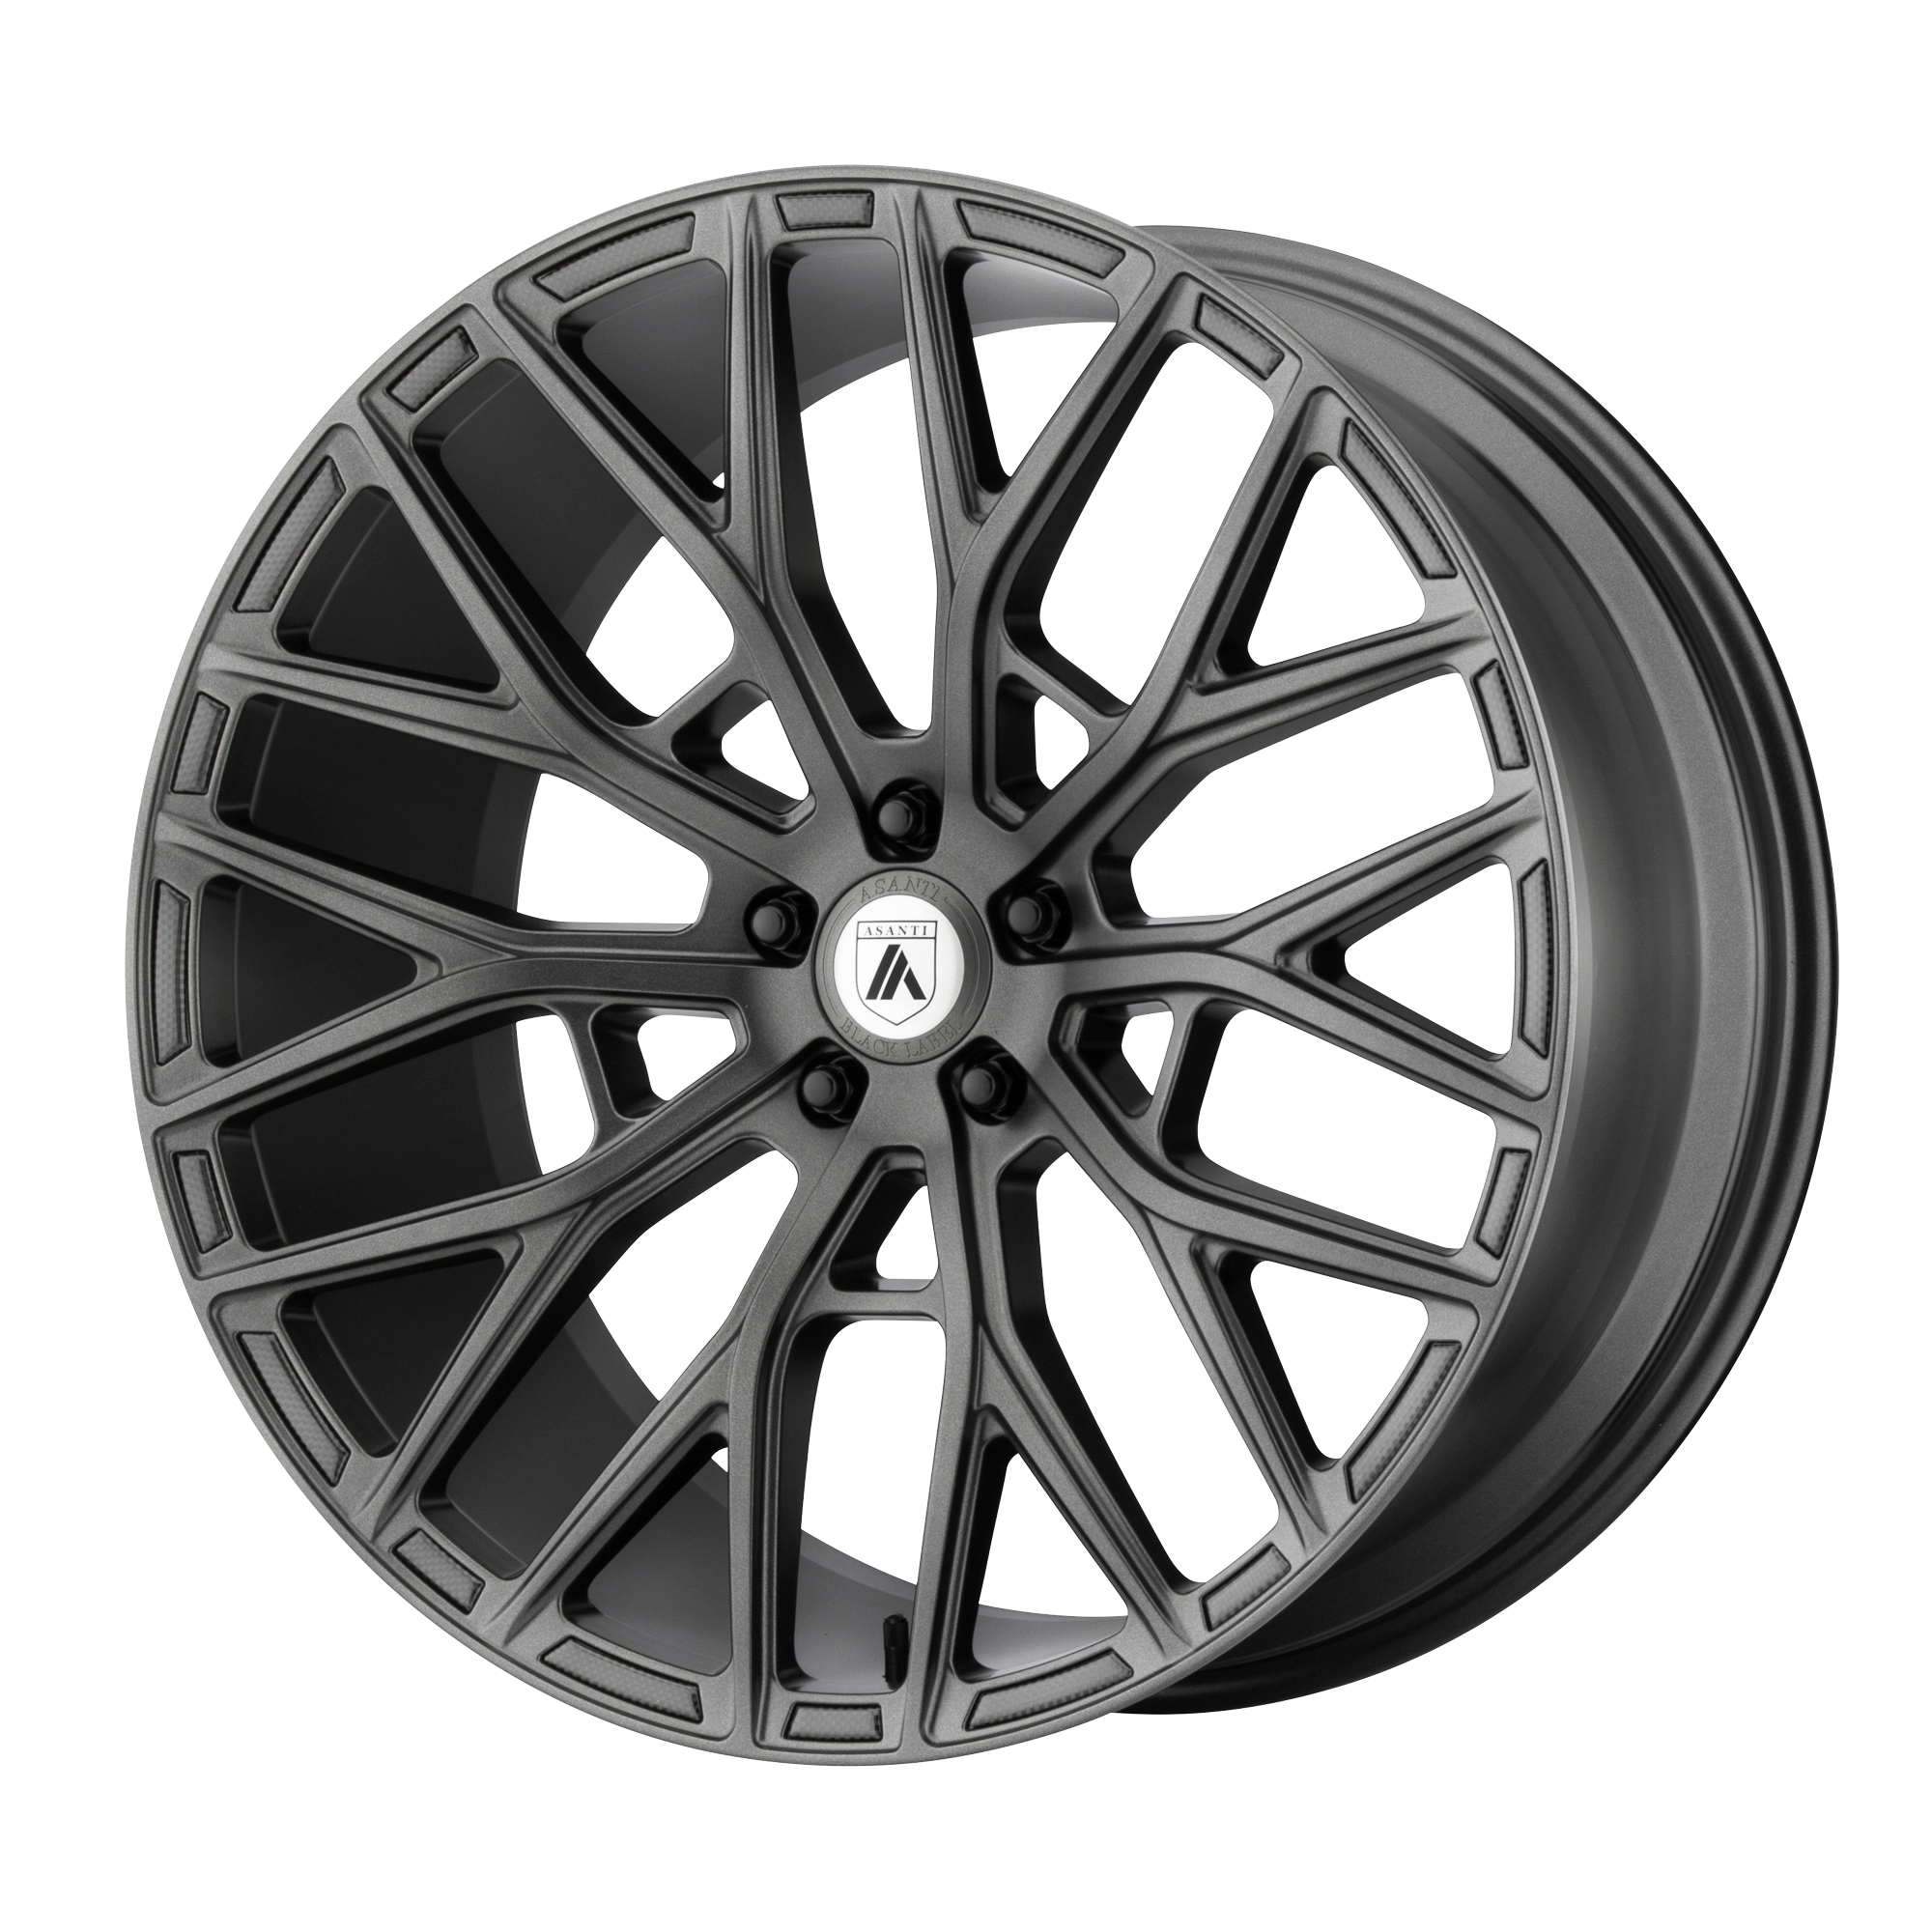 LEO 20x9 5x114.30 MATTE GRAPHITE (35 mm) - Tires and Engine Performance